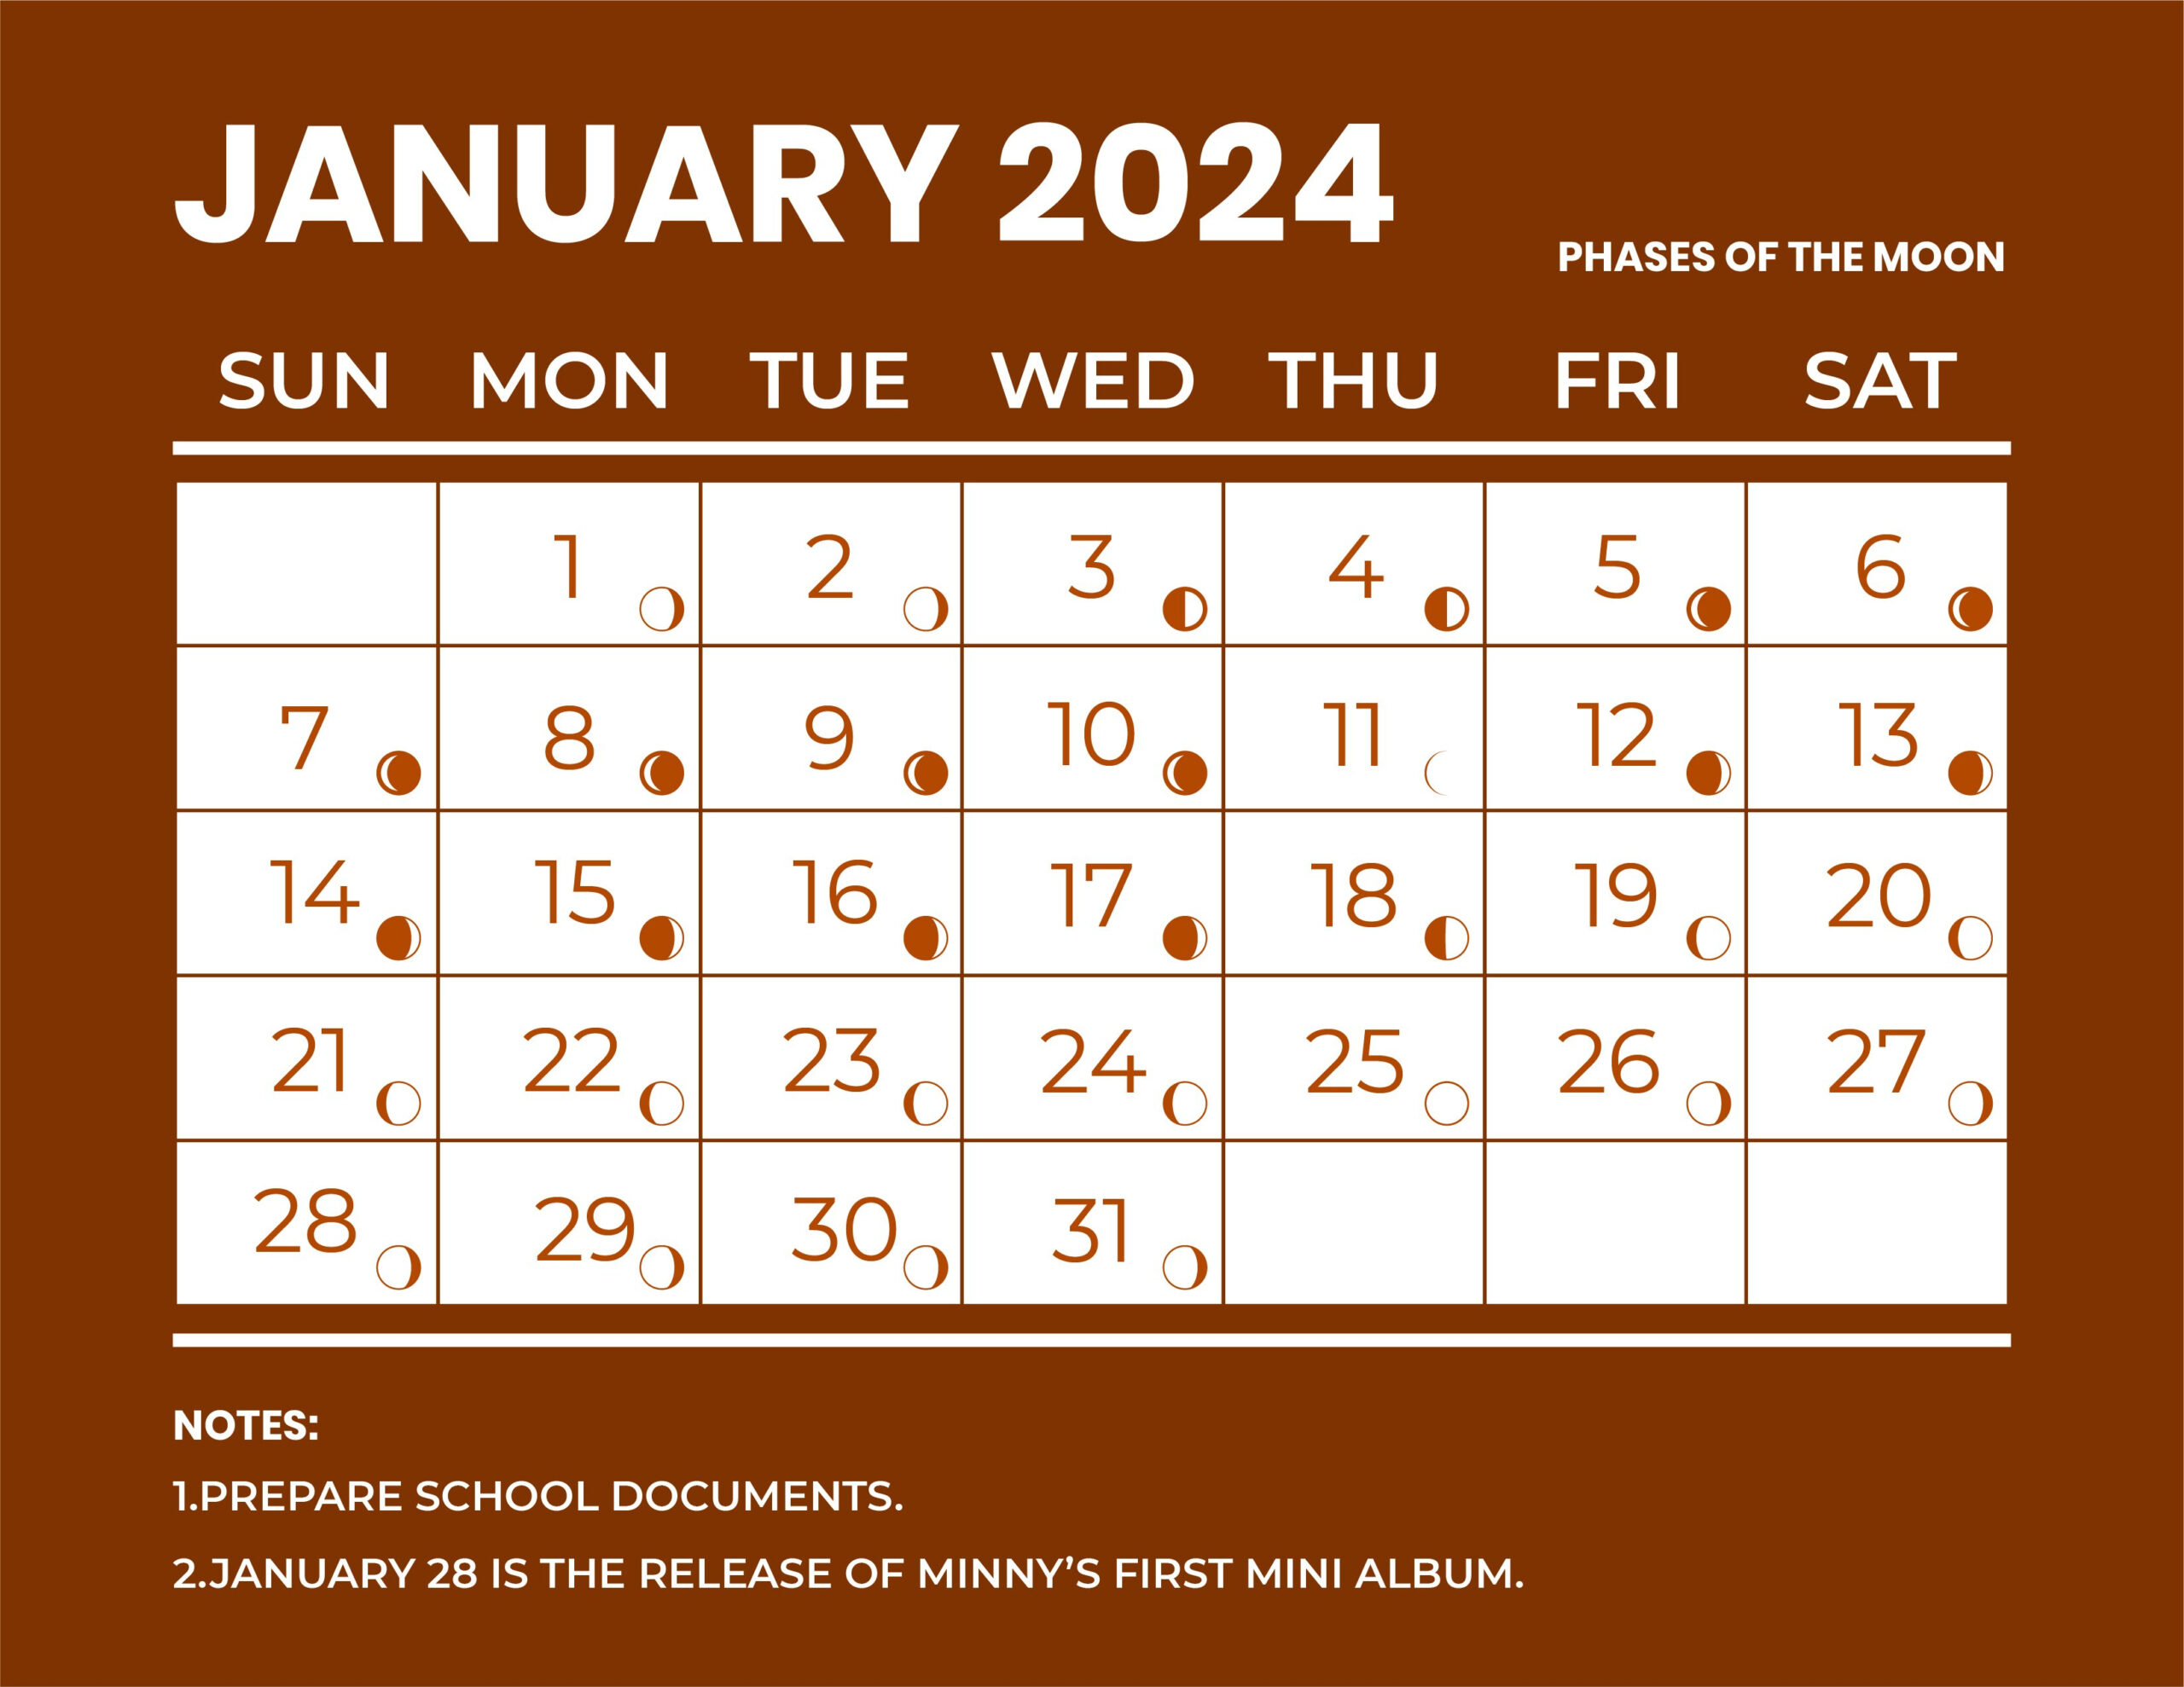 January 2024 Calendar With Moon Phases - Word, Illustrator, Eps for Printable 2024 Calendar With Holidays And Moon Phases